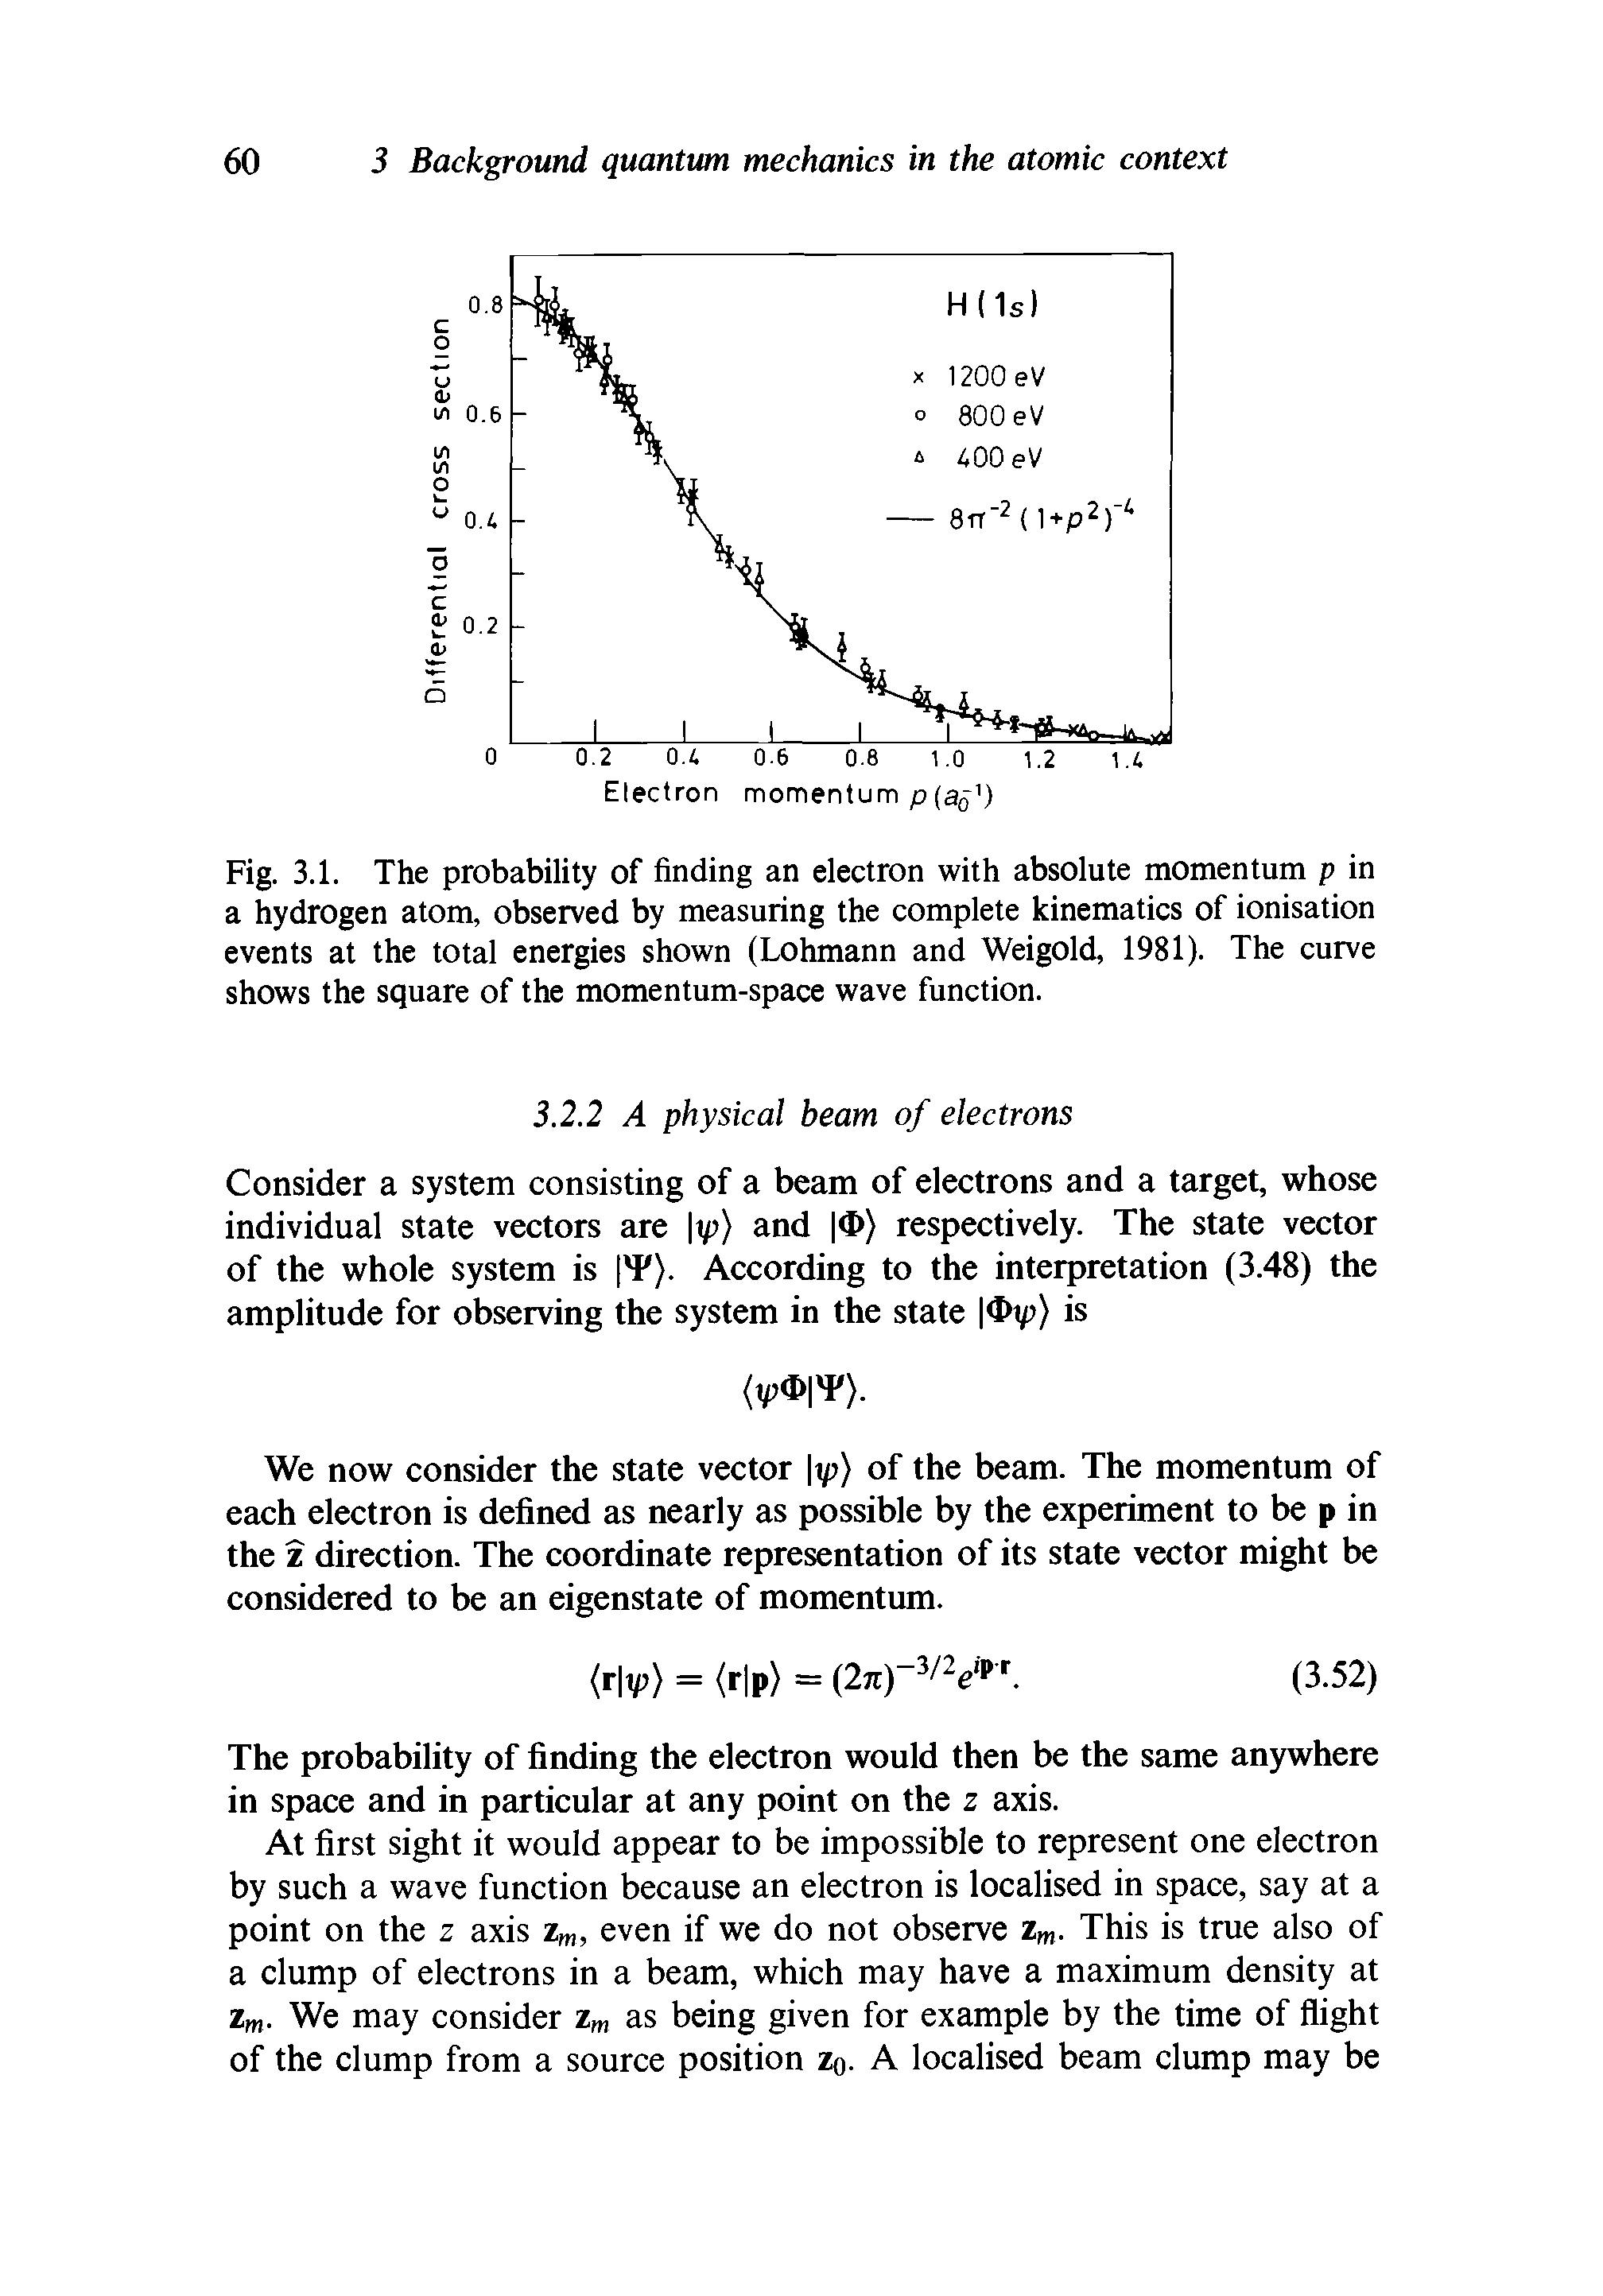 Fig. 3.1. The probability of finding an electron with absolute momentum p in a hydrogen atom, observed by measuring the complete kinematics of ionisation events at the total energies shown (Lohmann and Weigold, 1981). The curve shows the square of the momentum-space wave function.